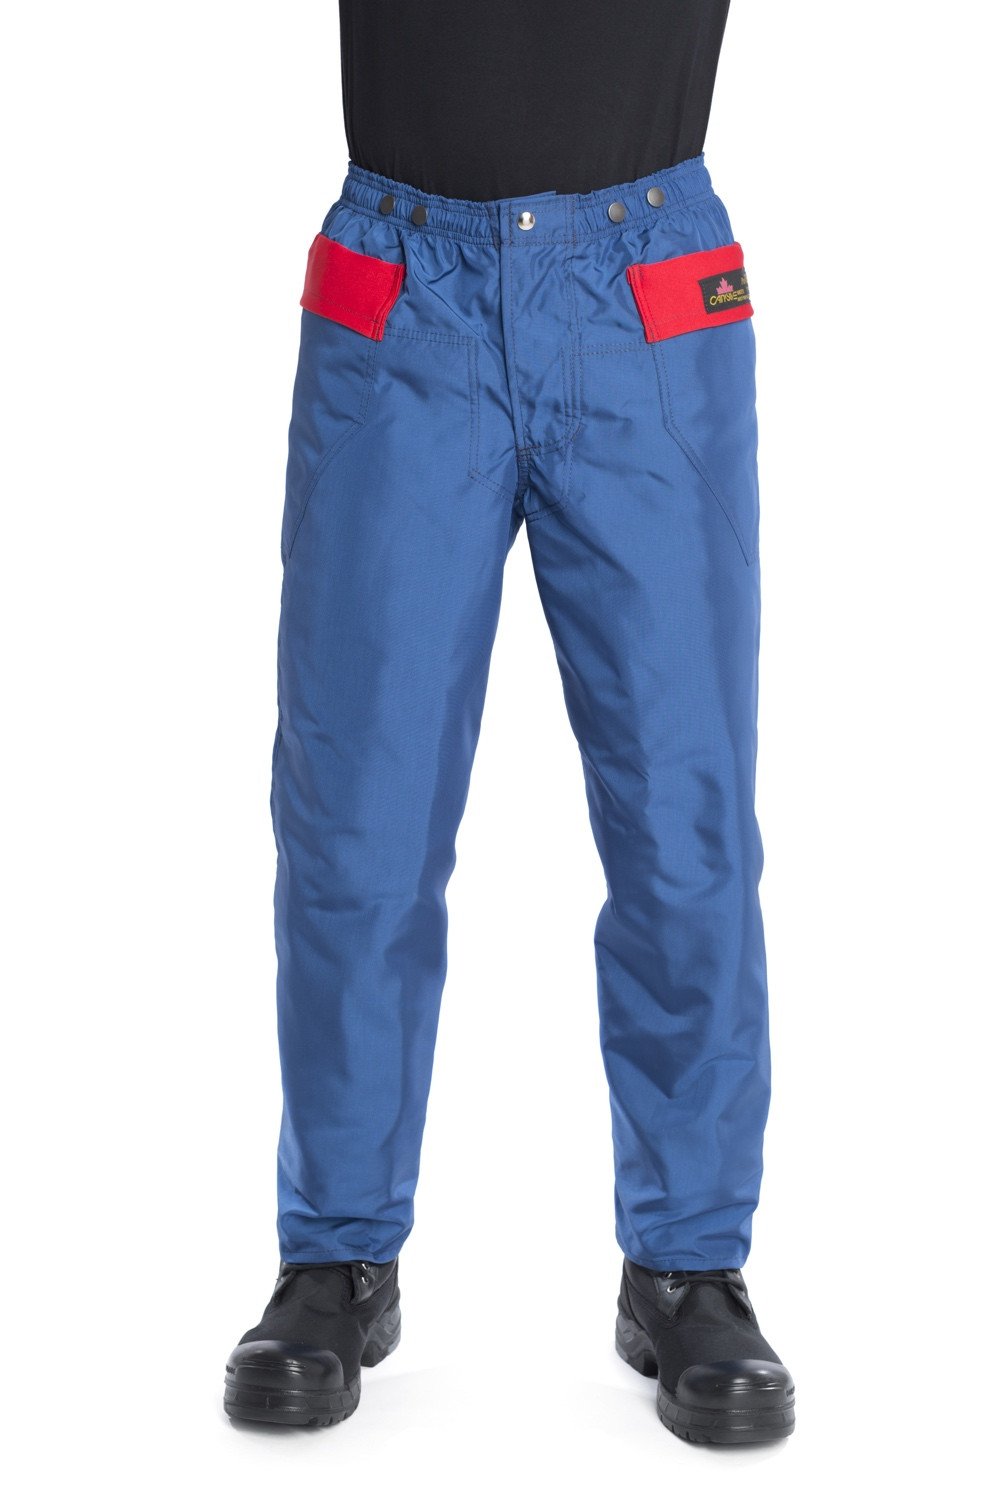 Durable Canswe Safety Pants